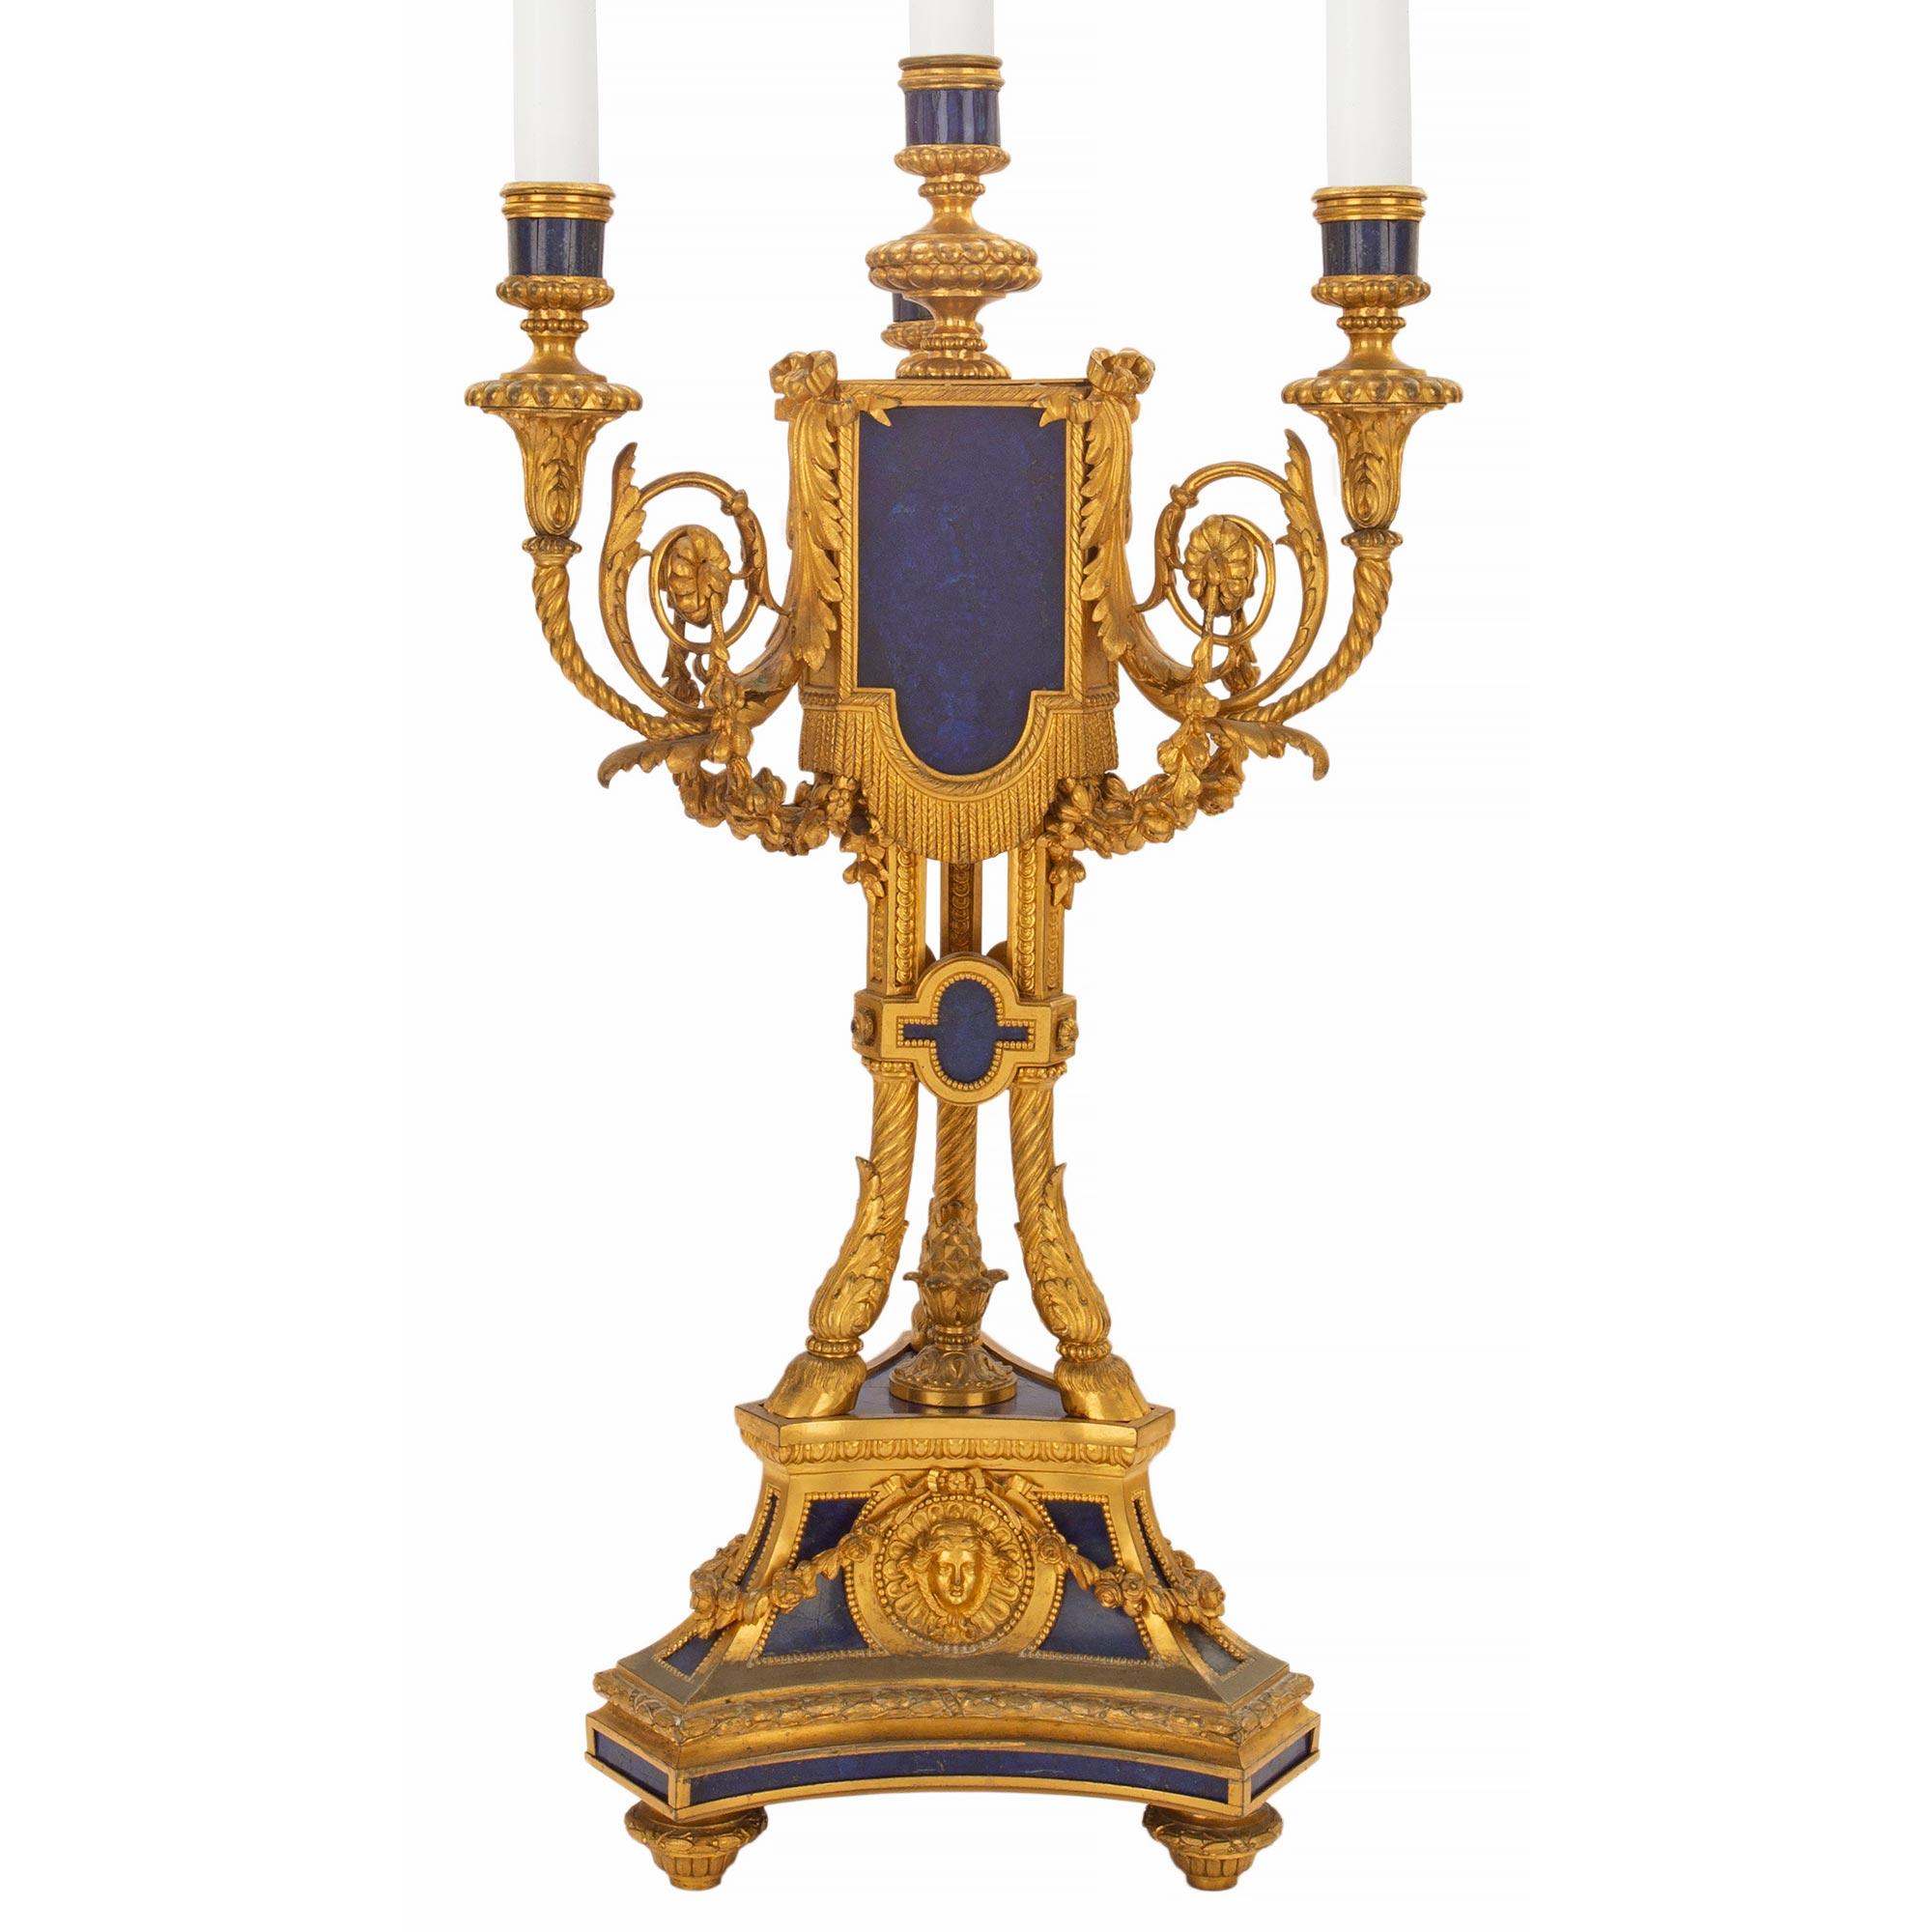 A spectacular and large-scaled pair of early 19th century French Louis XVI st. ormolu and Lapis Lazuli four arm candelabras. The pair with all original gilt is raised by a triangular base with floral garlands and a central medallion of the sun king.